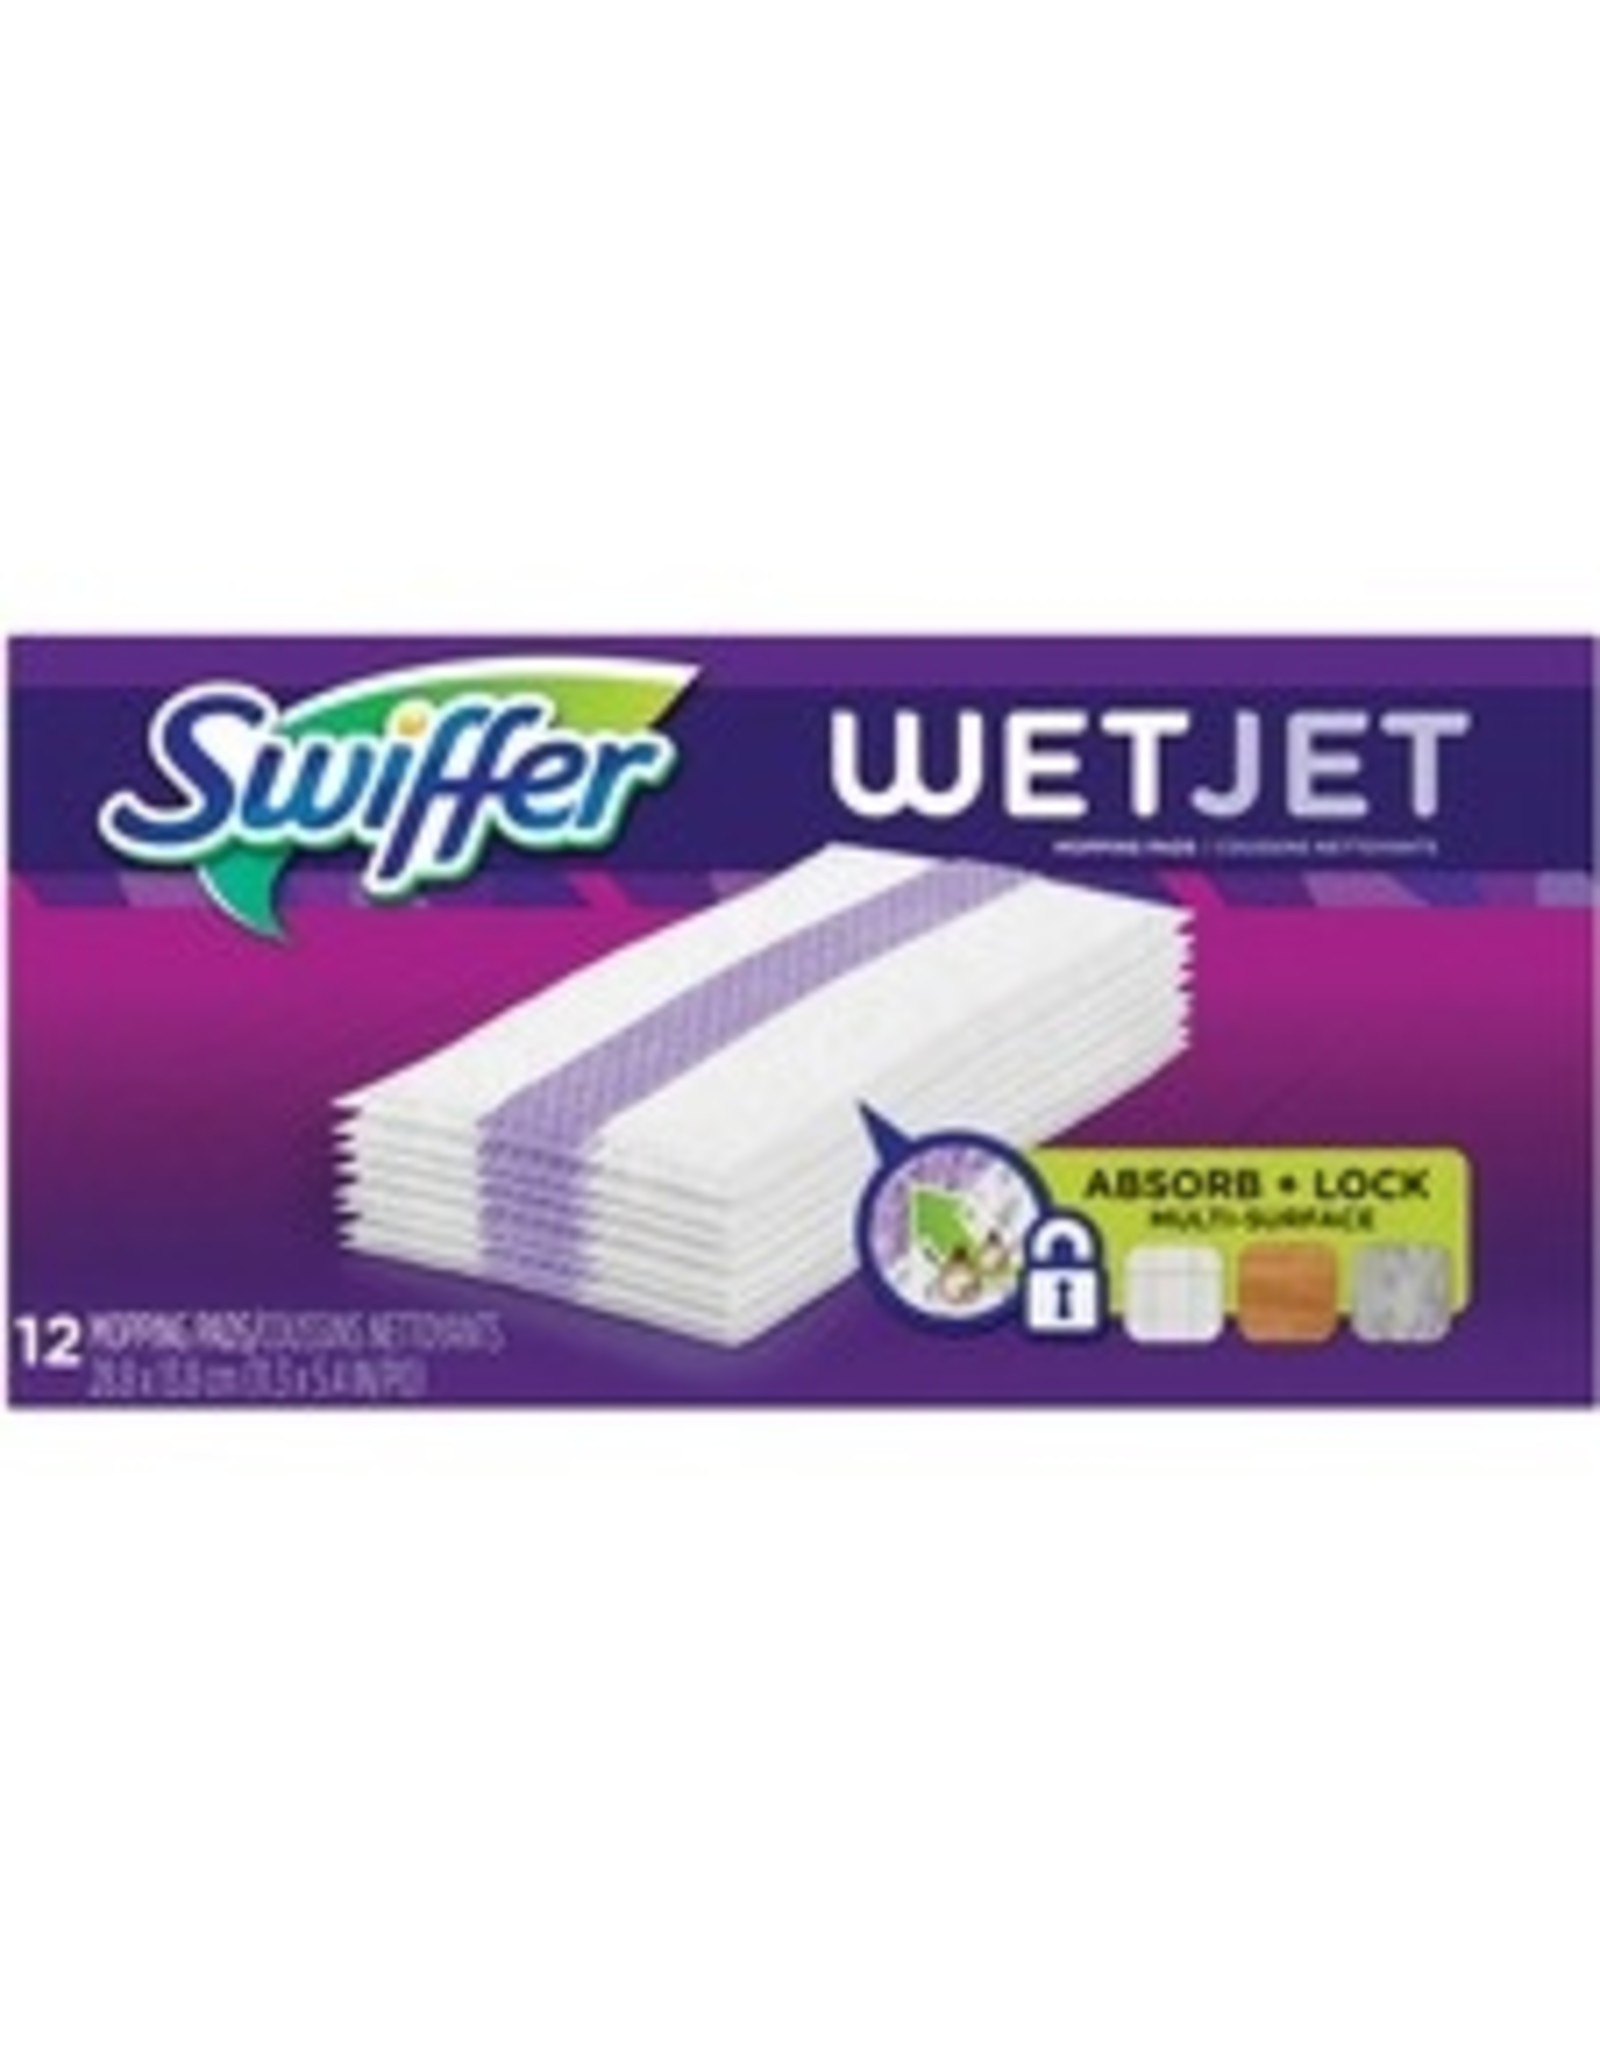 REFILL WETJET DRY UNSCENTED